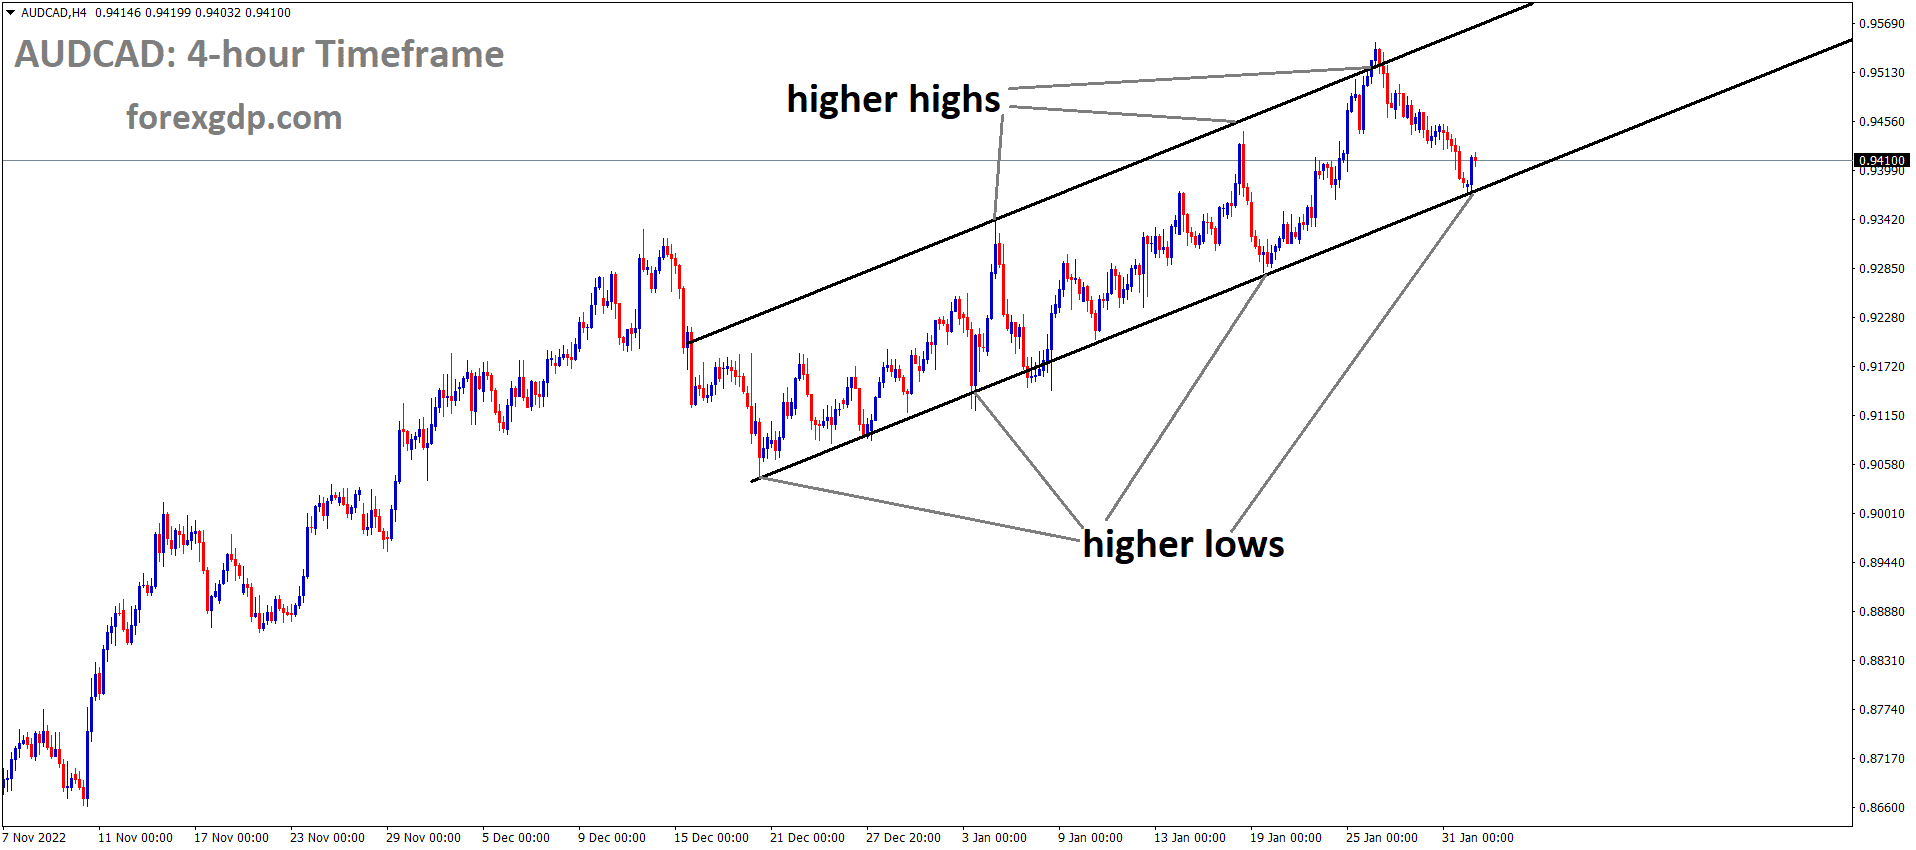 AUDCAD is moving in an Ascending Channel and the market has rebounded from the higher low area of the channel